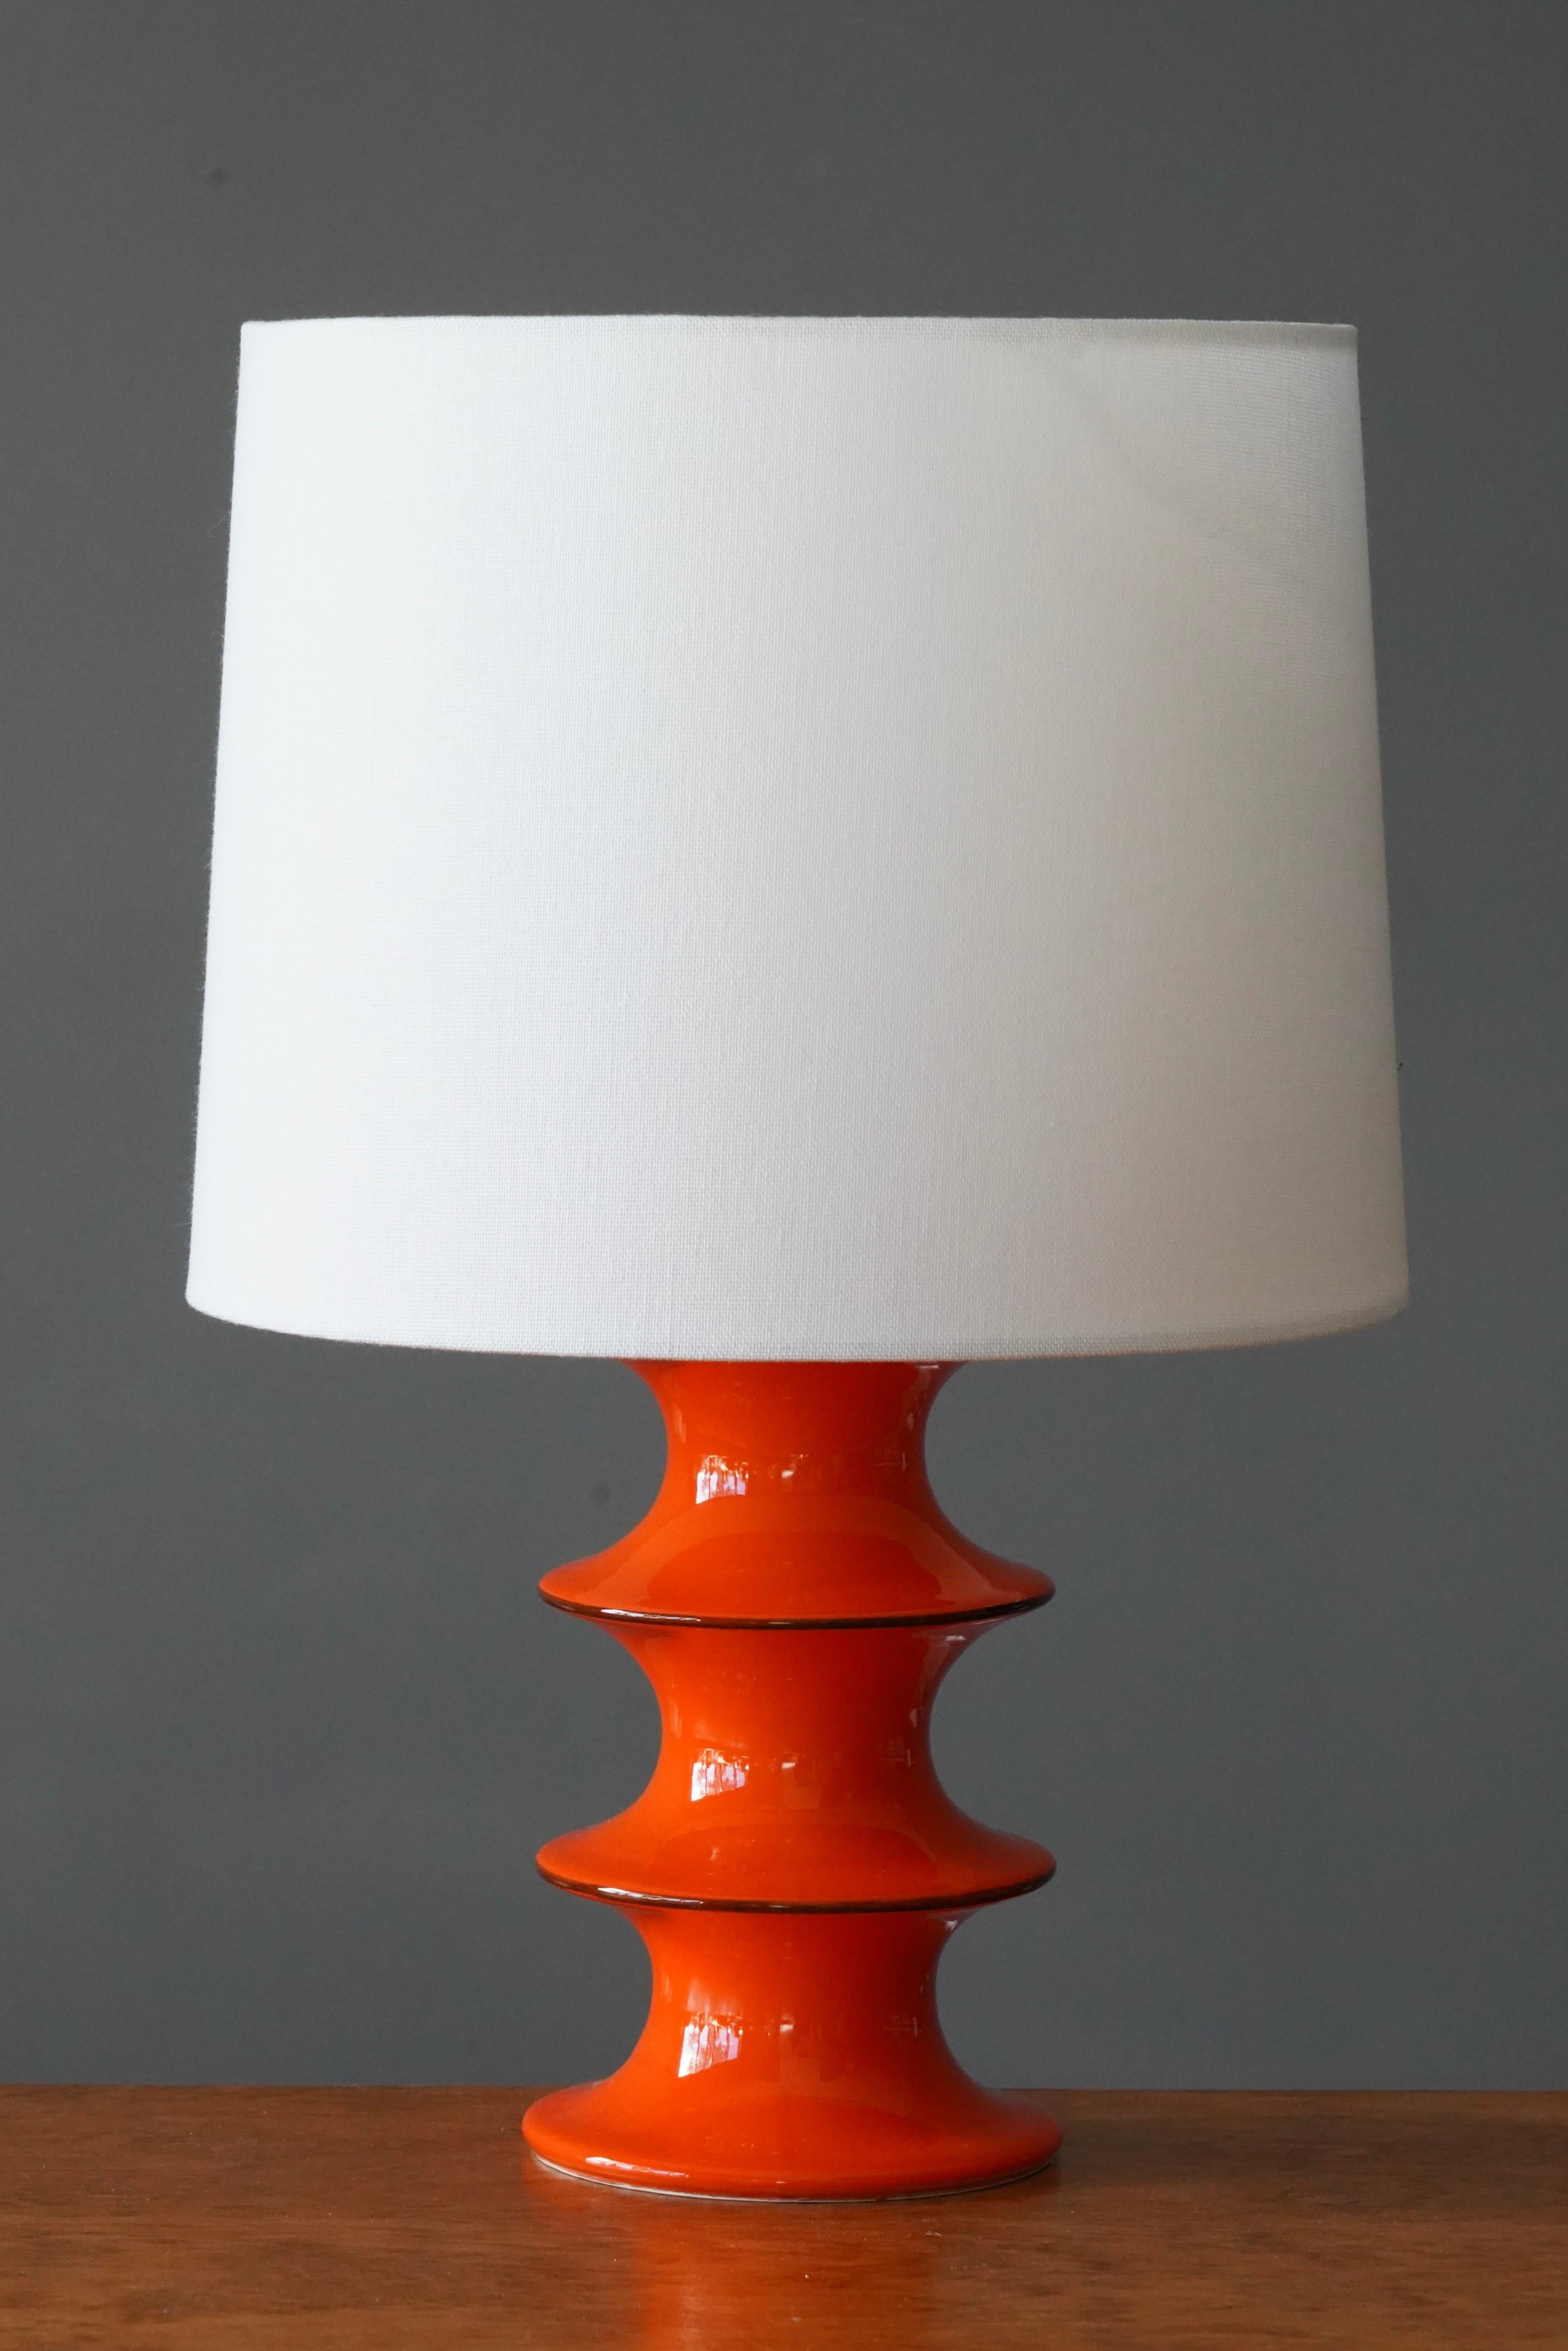 A table lamp designed by Inger Persson, produced by Rörstrand. Stamped. Orange glazed stoneware. c. 1960s.

Dimensions listed are without lampshade. 
Dimensions with shade: height is 15.5 inches, width is 10 inches.
Dimensions of shade: top